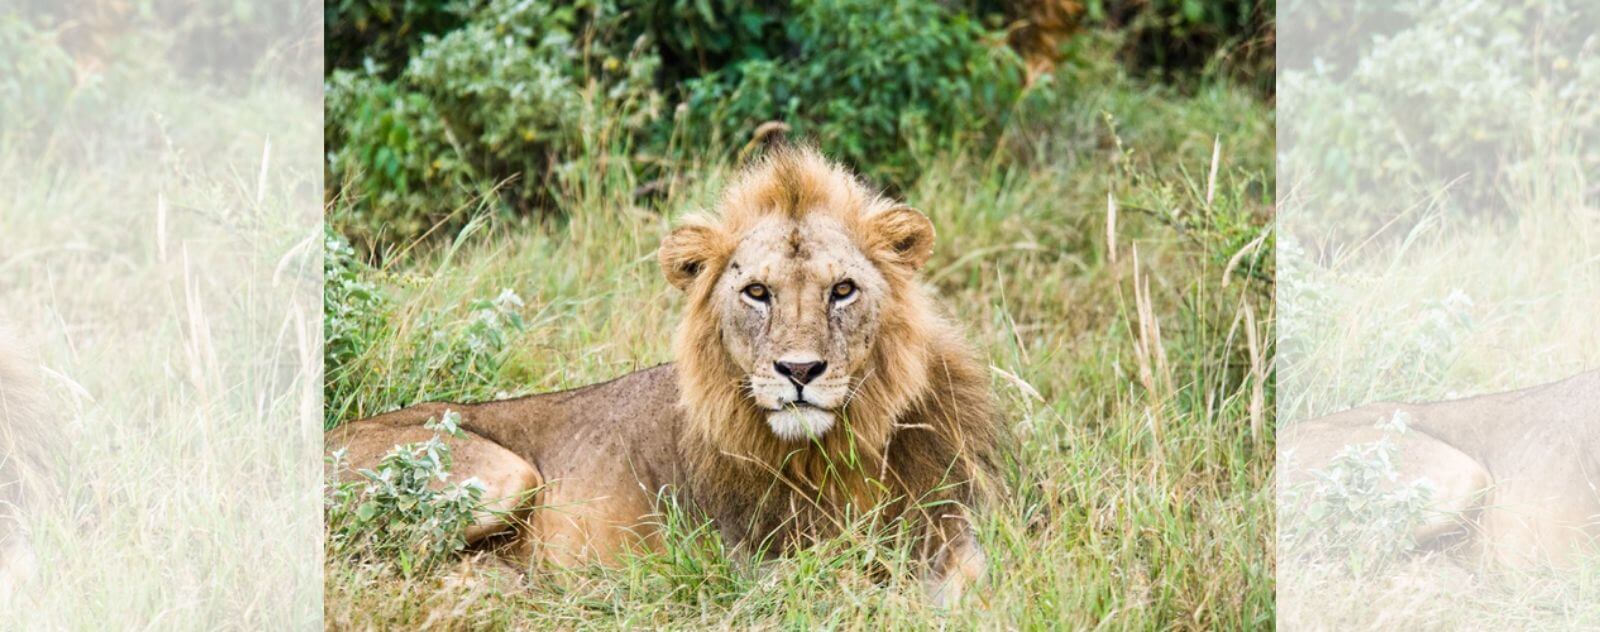 Asiatic Lion of the Gir in India